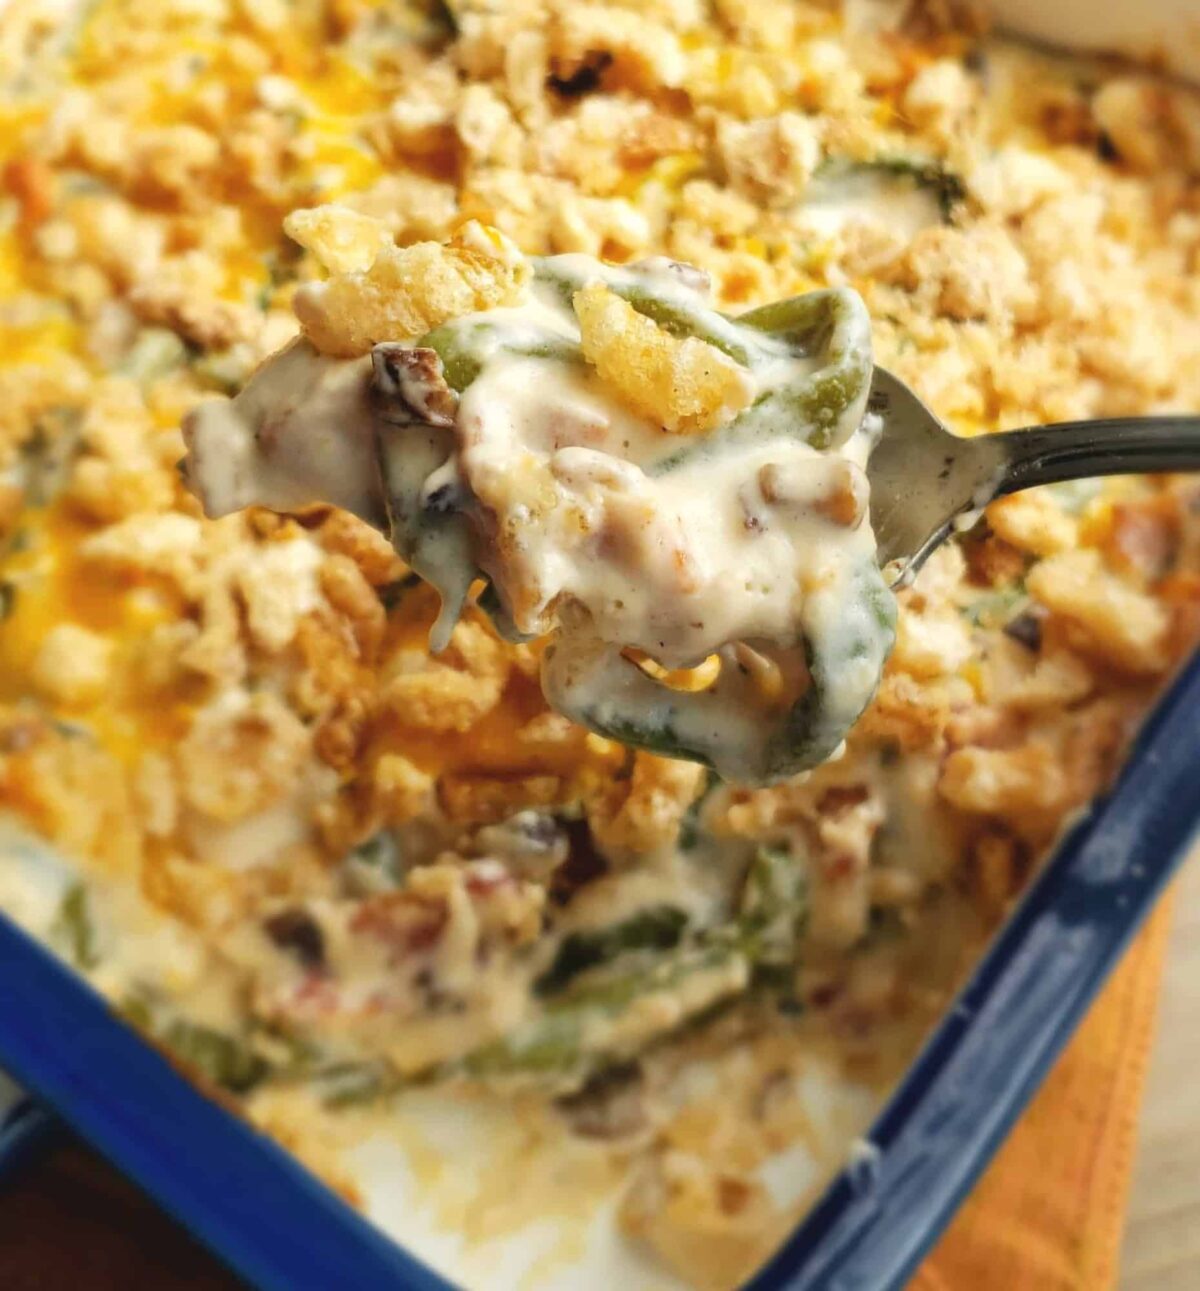 Keto and Gluten Free Green Bean casserole being scooped out of the dish and focus is on the spoonful. Easter side dish